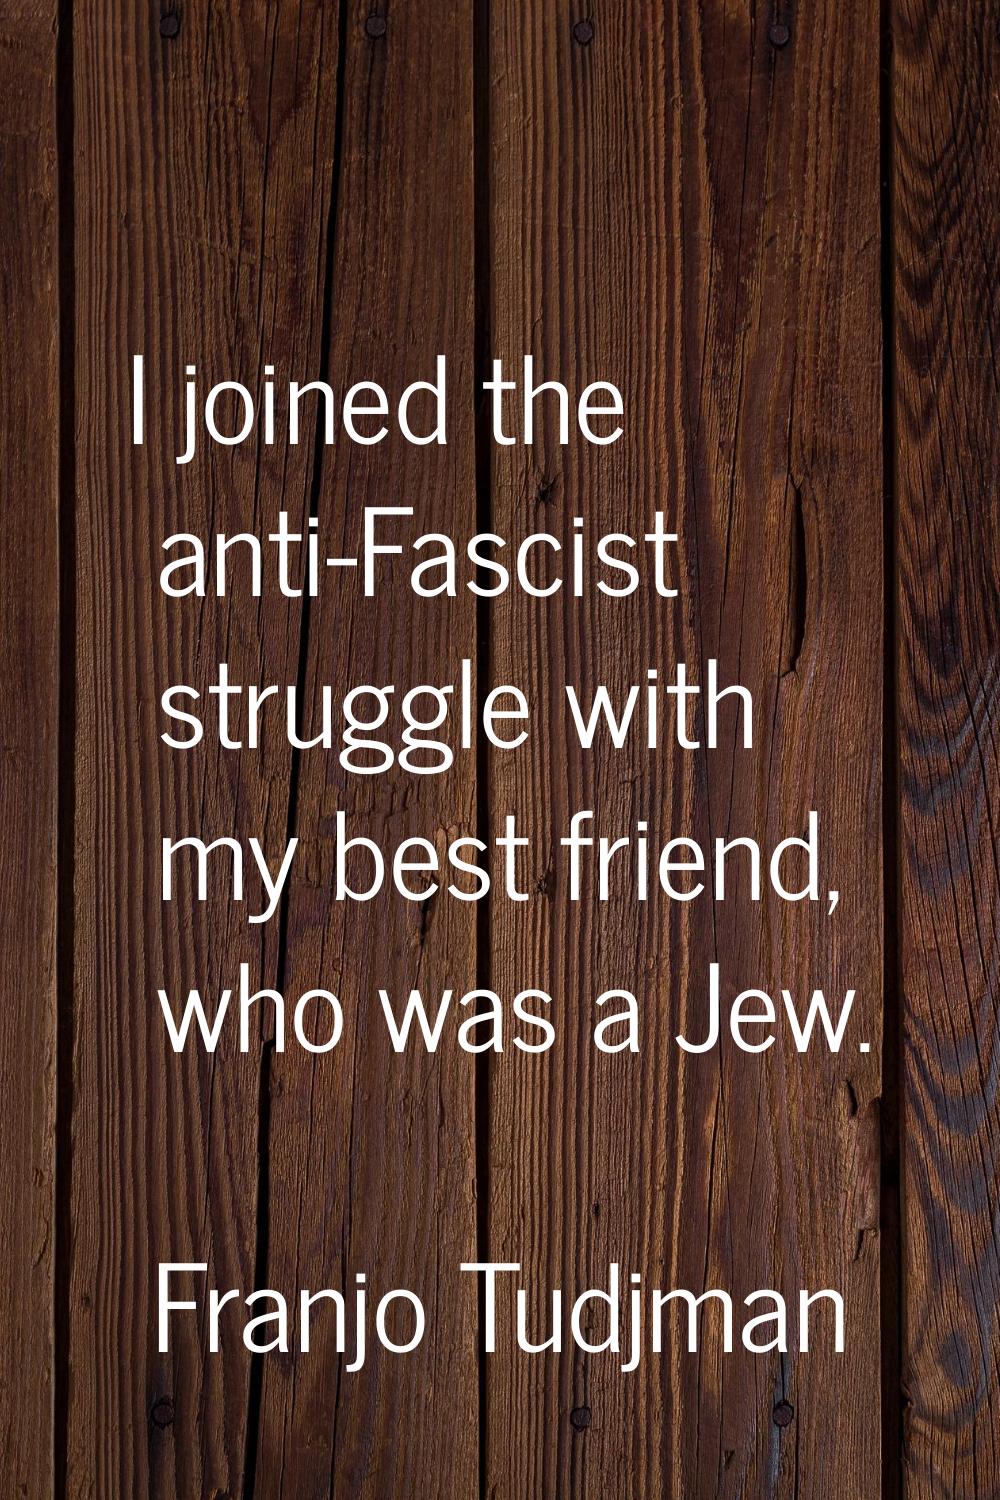 I joined the anti-Fascist struggle with my best friend, who was a Jew.